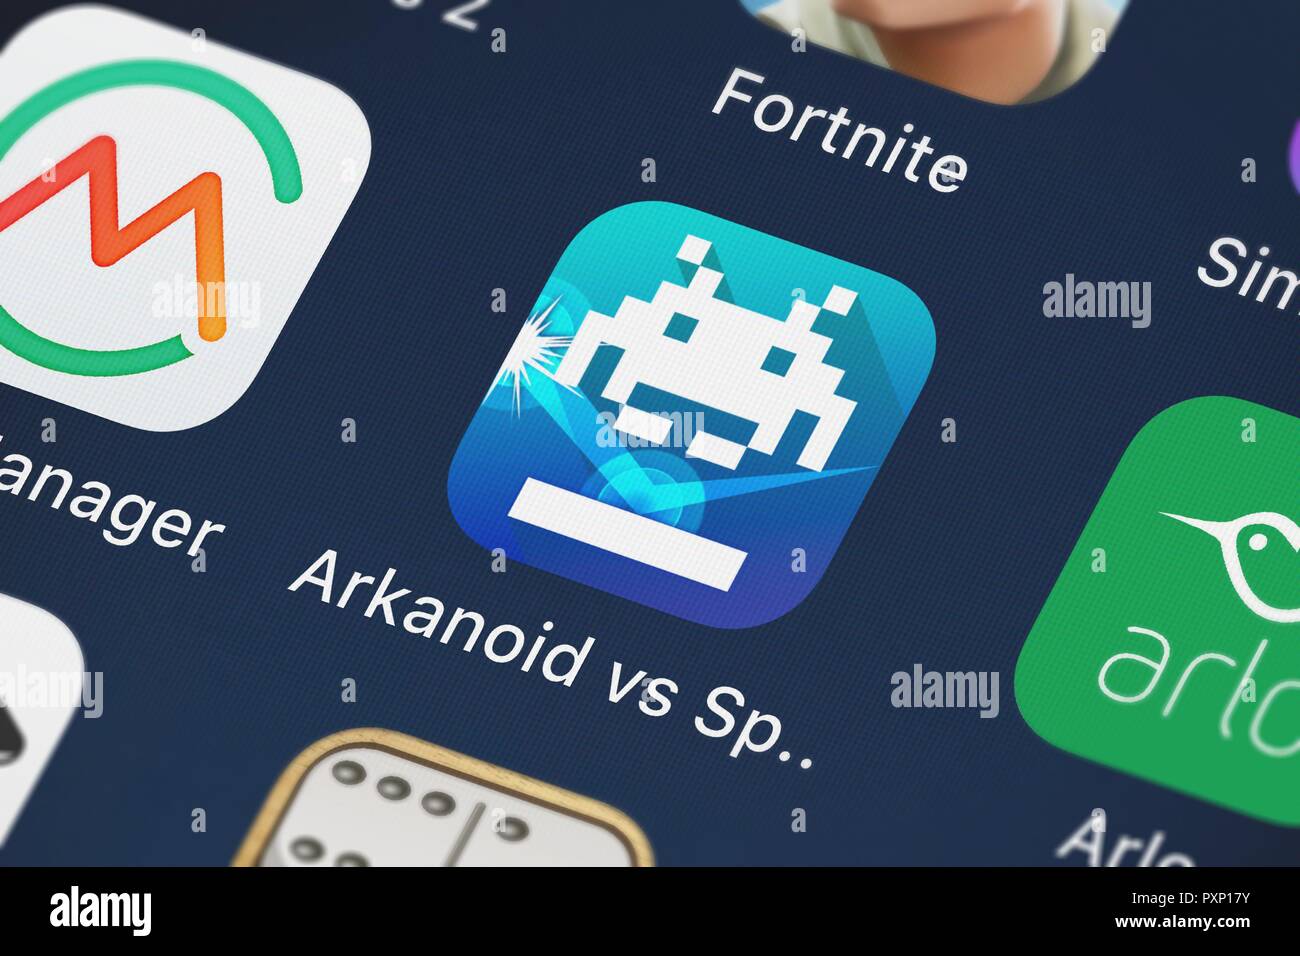 London, United Kingdom - October 23, 2018: Close-up shot of the Arkanoid vs Space Invaders mobile app from SQUARE ENIX INC. Stock Photo